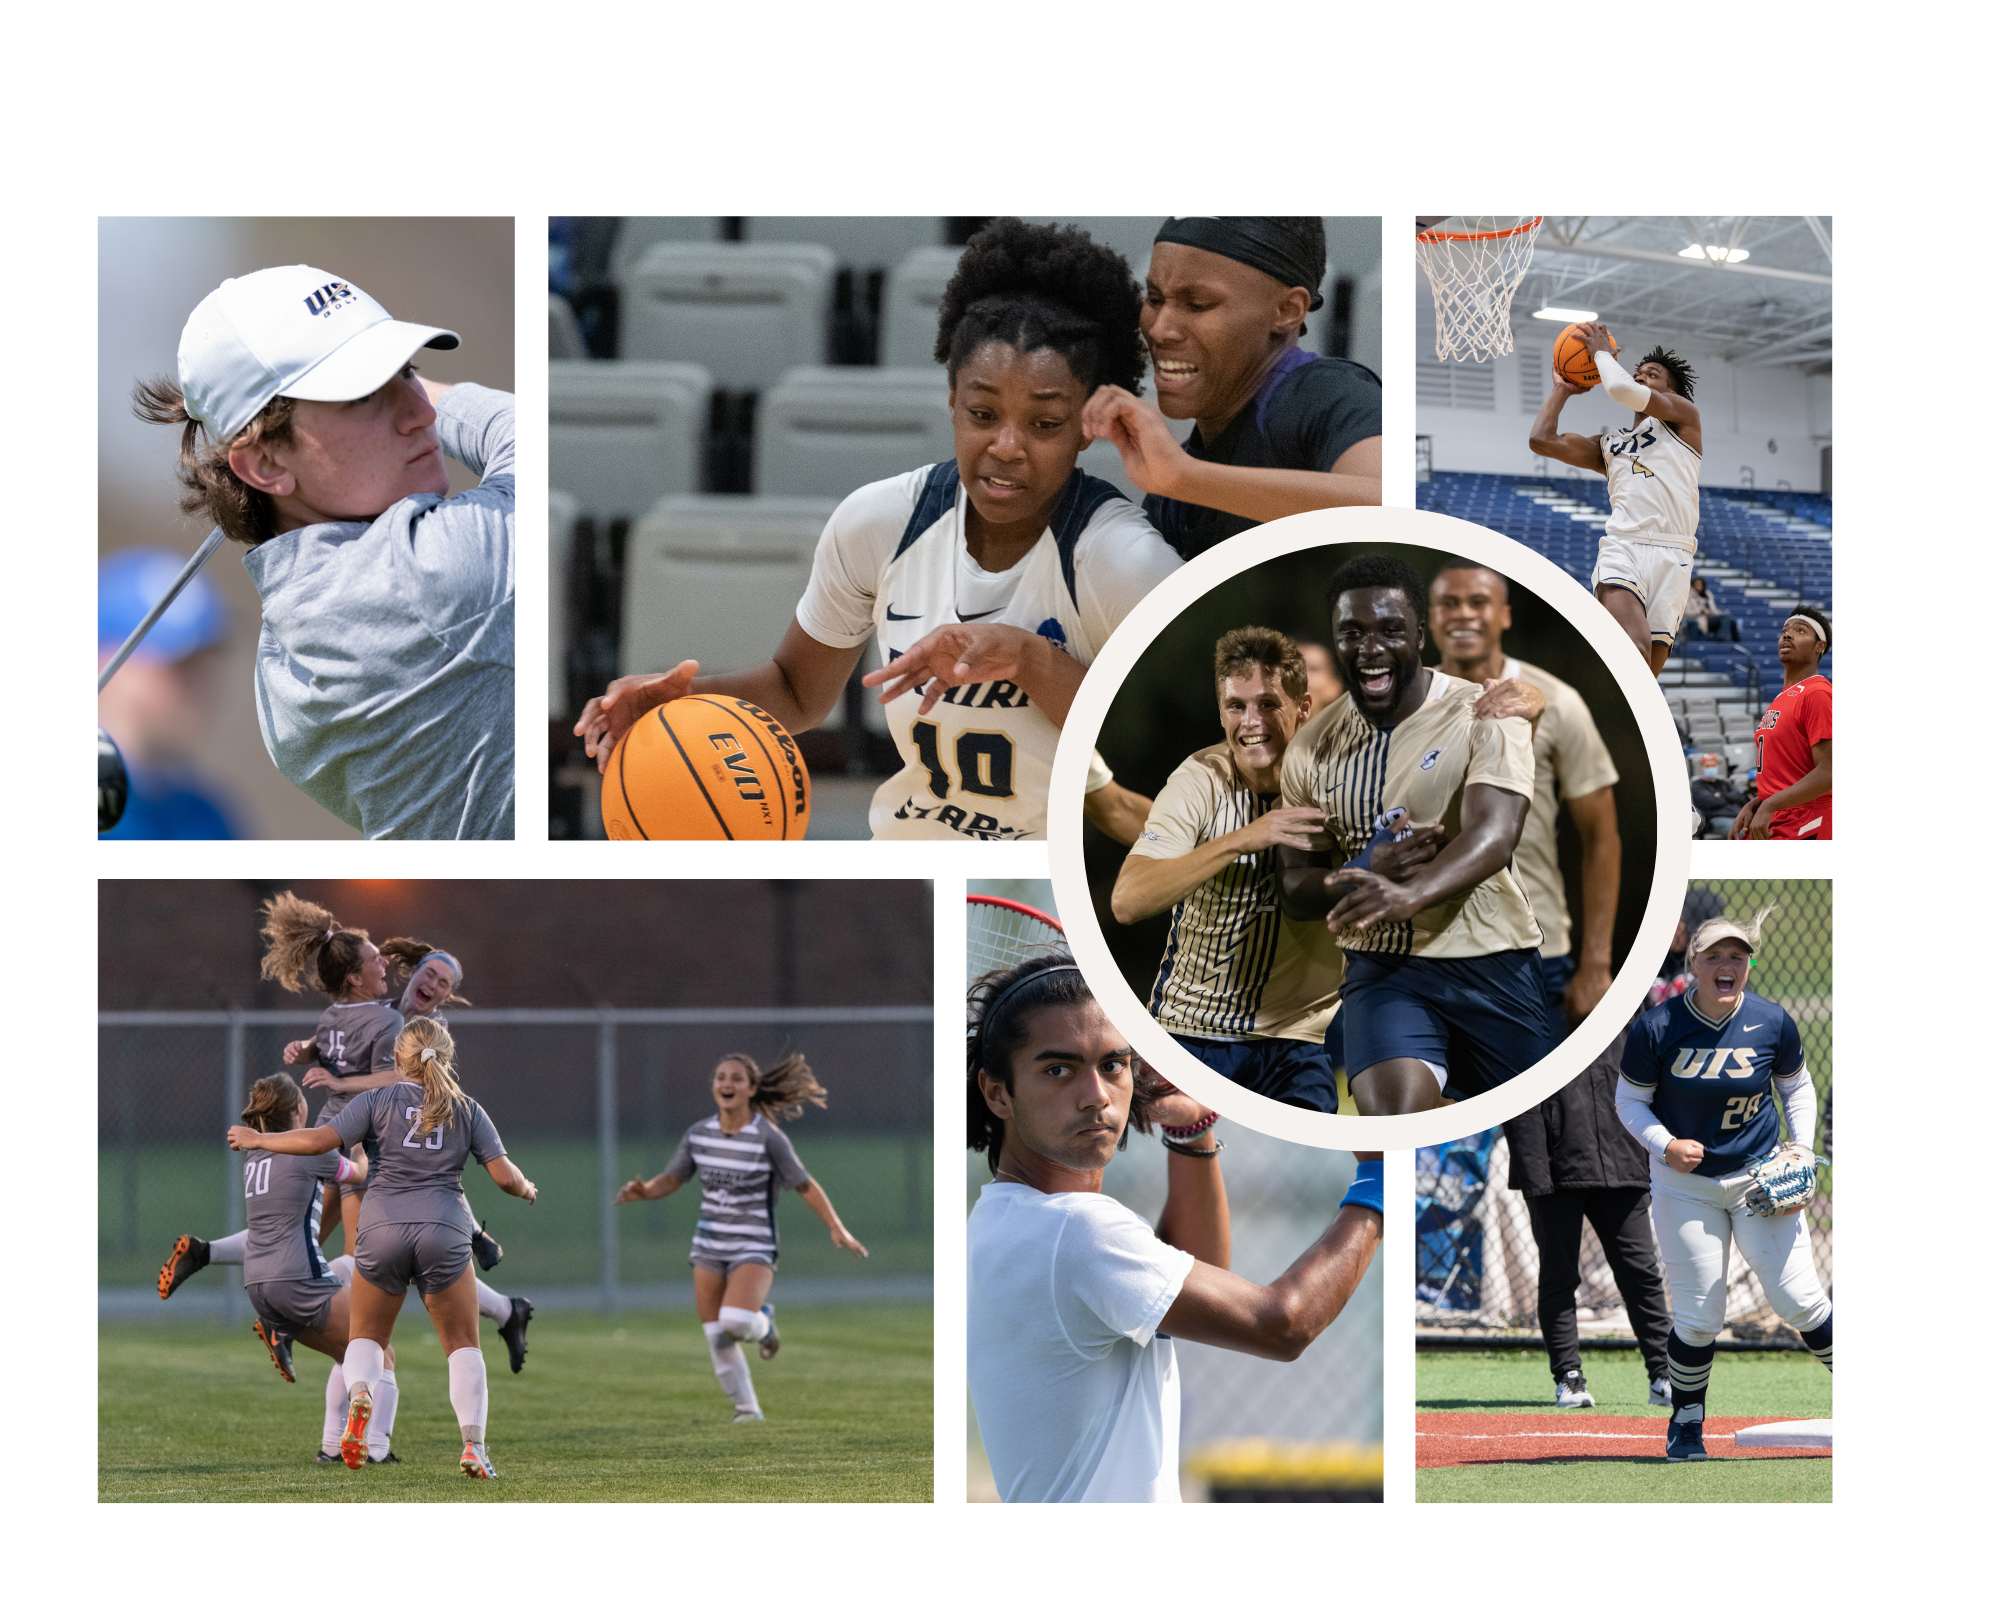 UIS athletes are seen in a collage playing their various sports